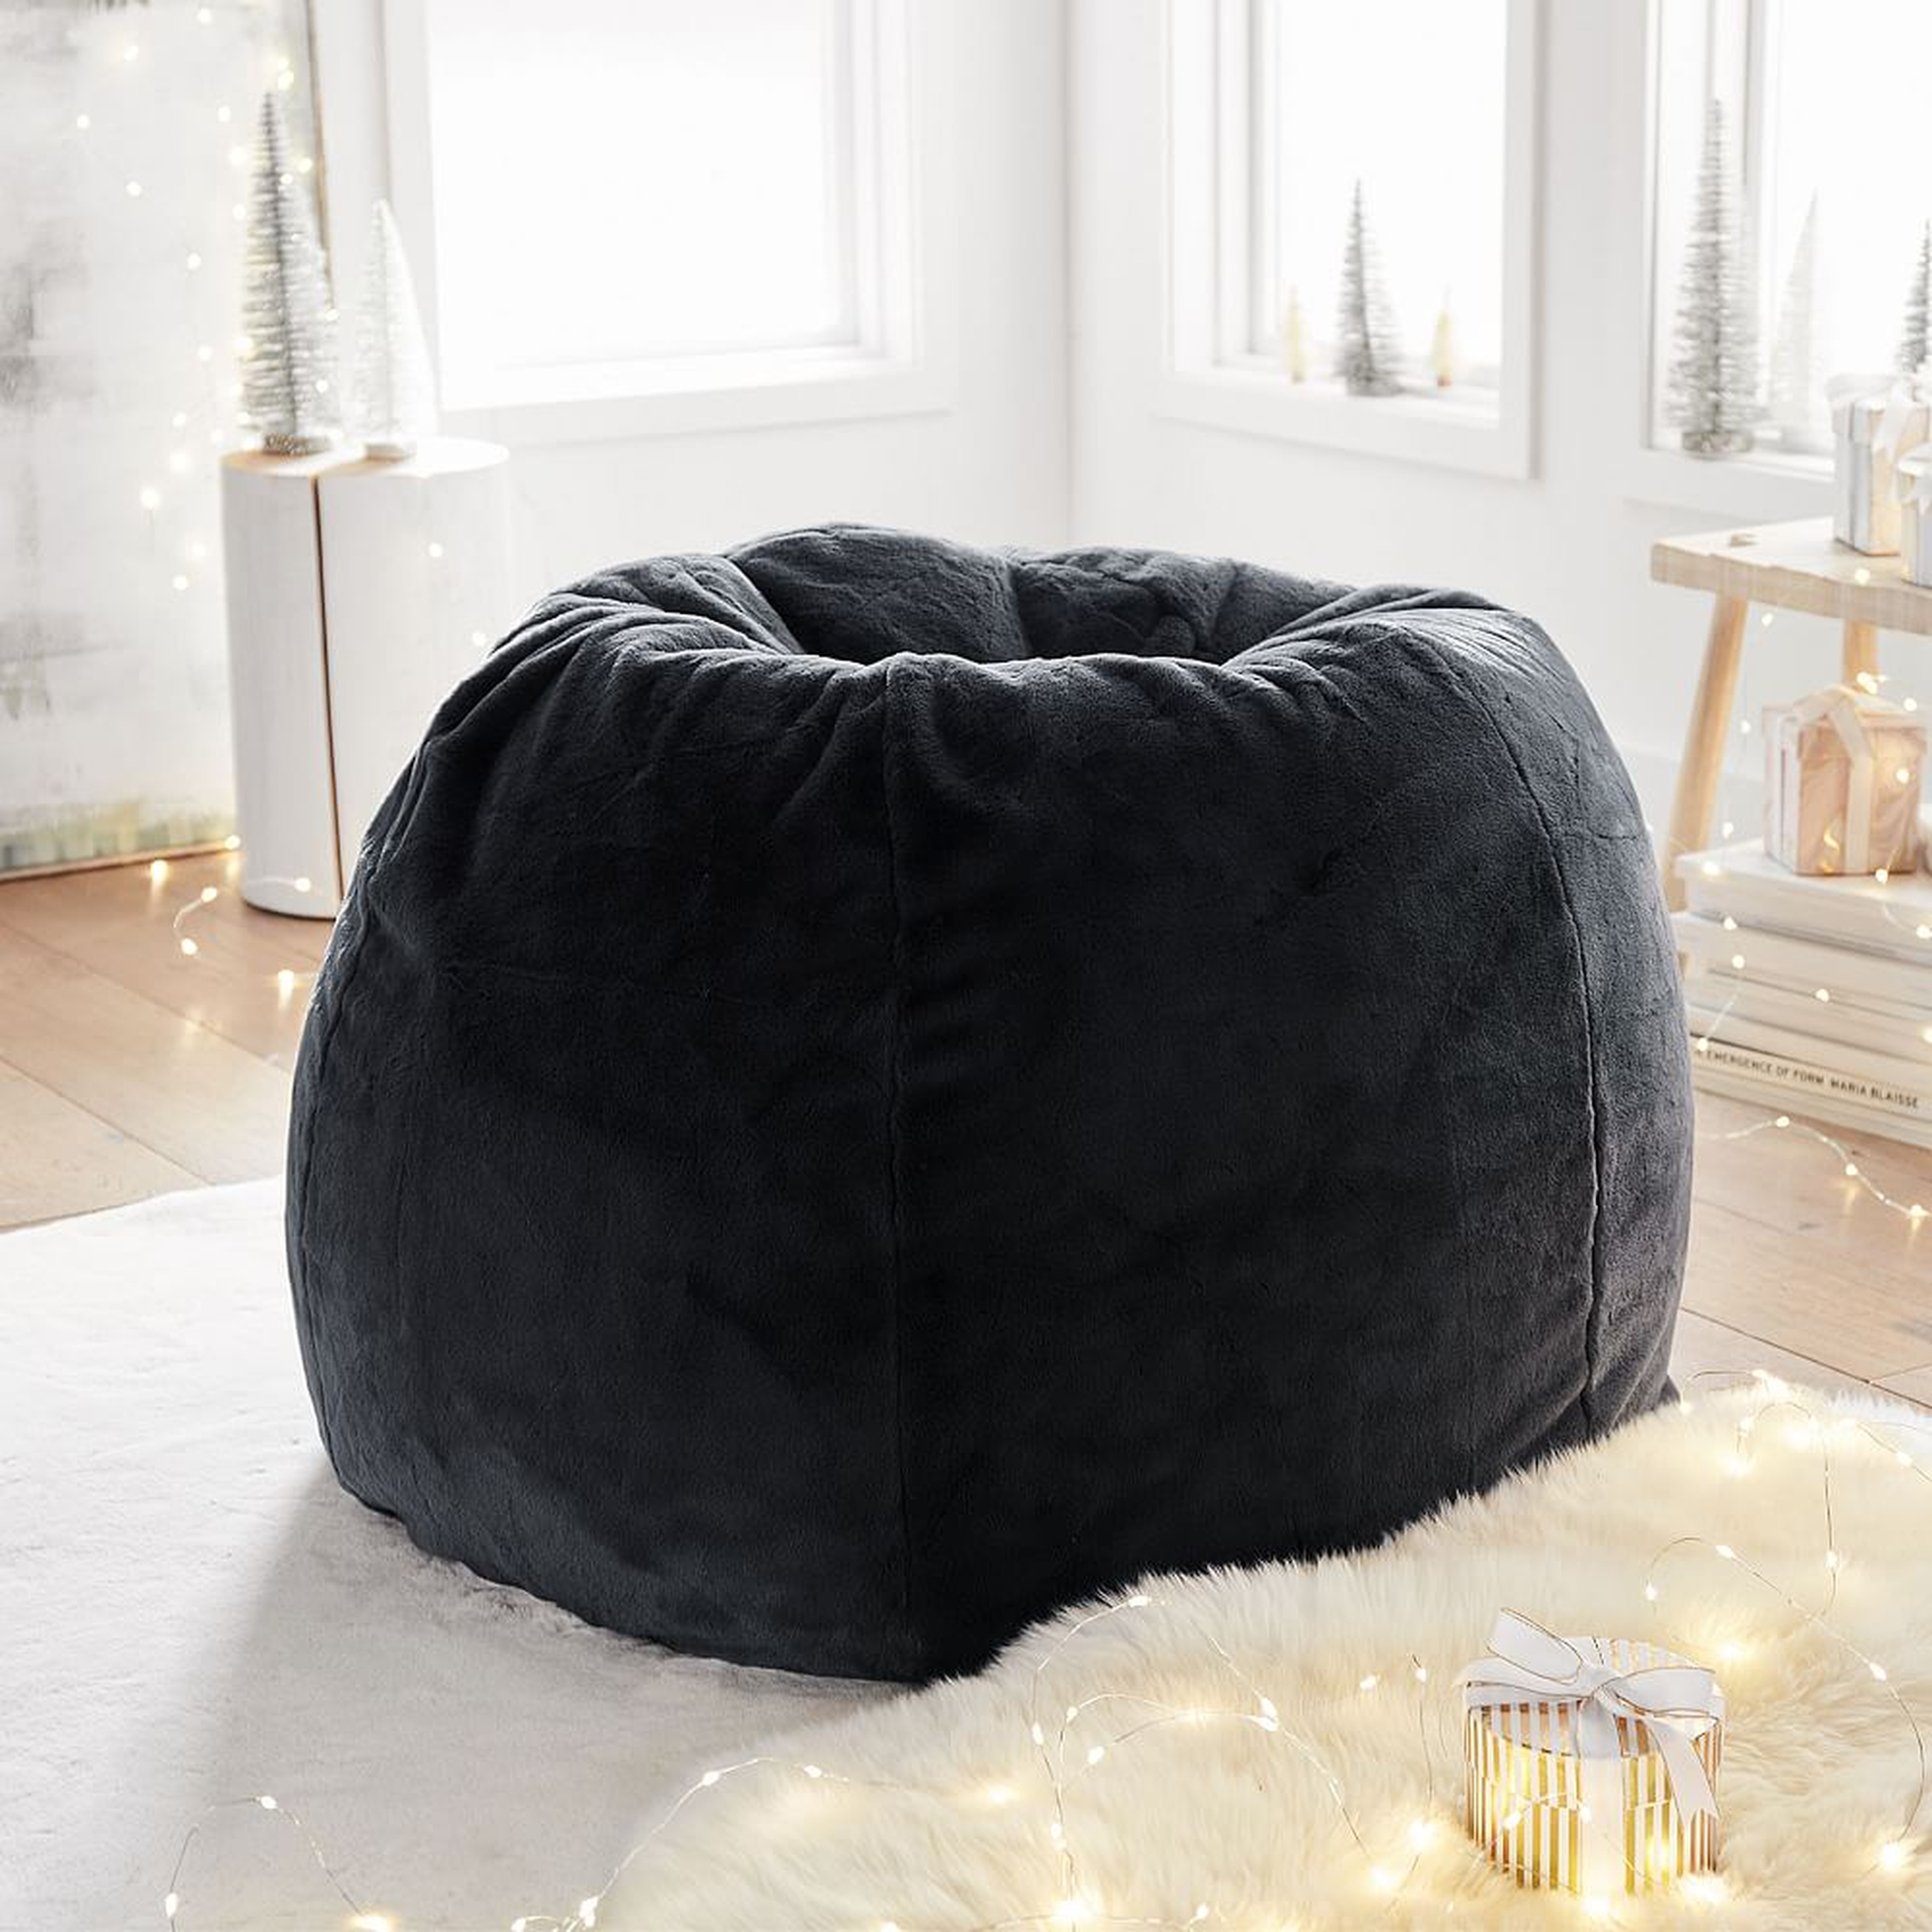 Recycled Faux-Fur Bean Bag Chair Slipcover + Insert, Periscope/Black, Large - Pottery Barn Teen